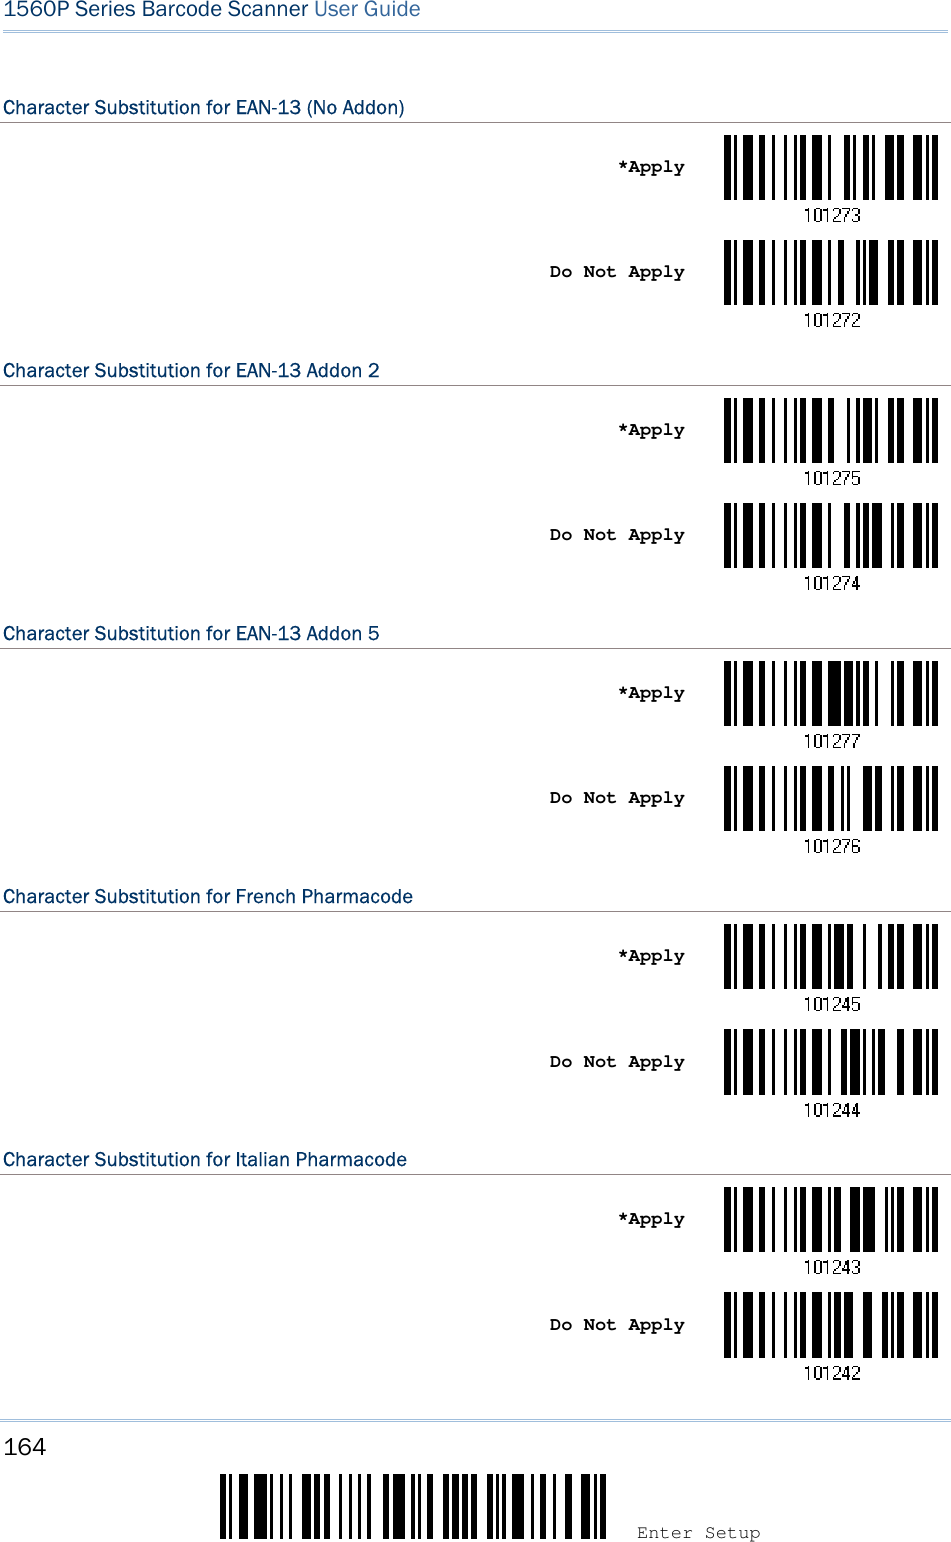 164 Enter Setup 1560P Series Barcode Scanner User Guide Character Substitution for EAN-13 (No Addon) *ApplyDo Not Apply Character Substitution for EAN-13 Addon 2 *ApplyDo Not Apply Character Substitution for EAN-13 Addon 5 *ApplyDo Not Apply Character Substitution for French Pharmacode *ApplyDo Not Apply Character Substitution for Italian Pharmacode *ApplyDo Not Apply 